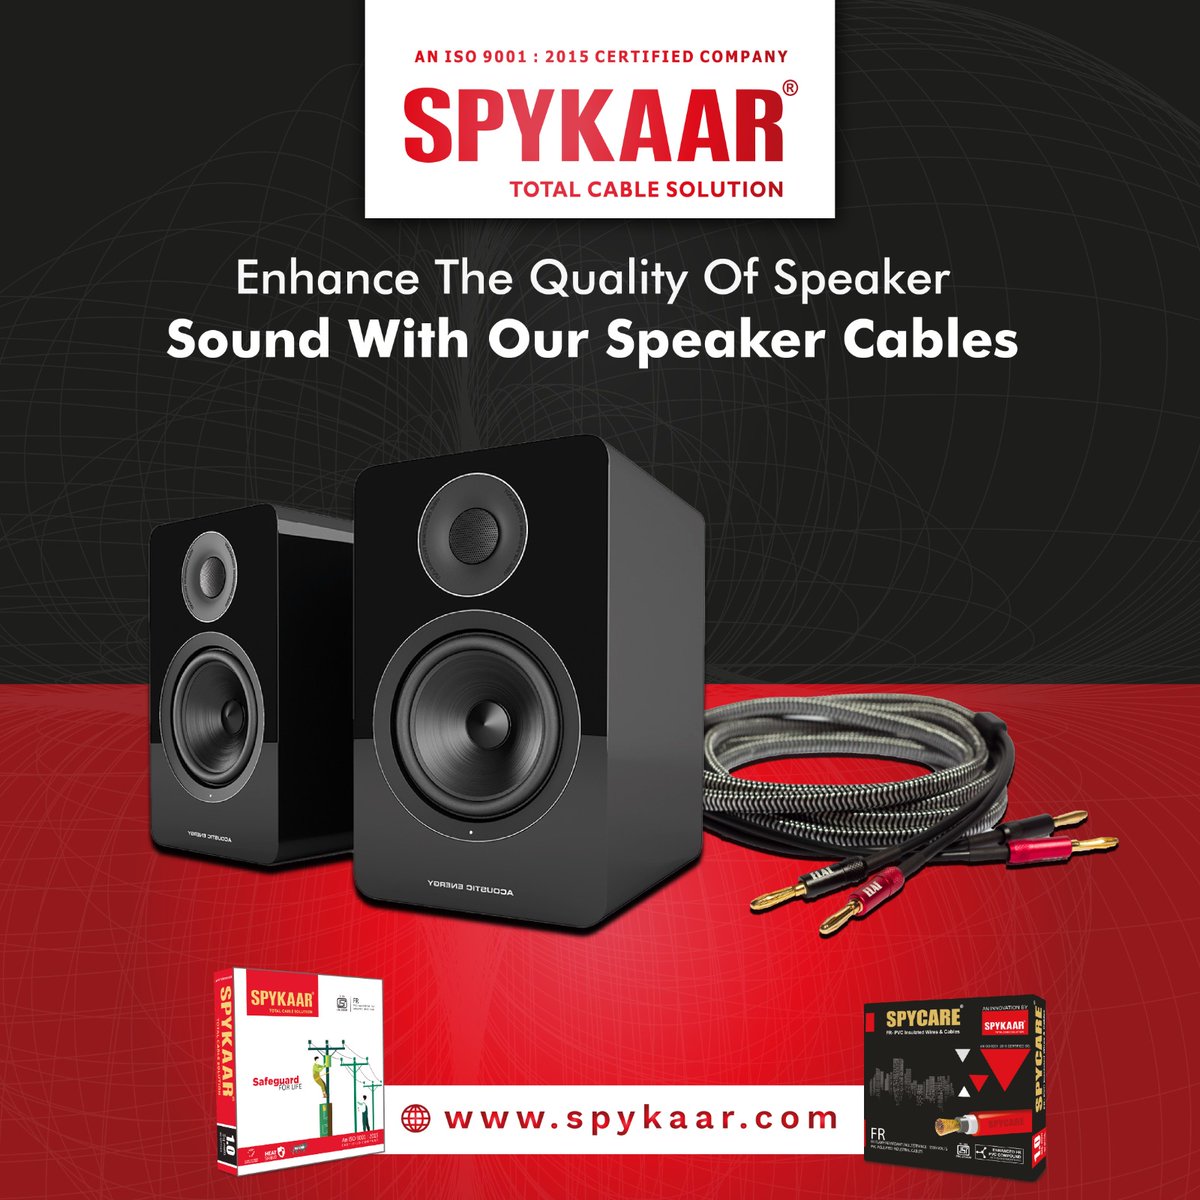 📞 Call Us: +91-8072618515/+91-7890058000
📍  Visit: spykaar.com
.
.
#Coimbatore #Bestelectricalshop #ElectricCable #SpeakerCables #TopCableWireDealers #ElectricWireManufacturersandSuppliers #WiresandCableManufactures 
#SanghviElectricals